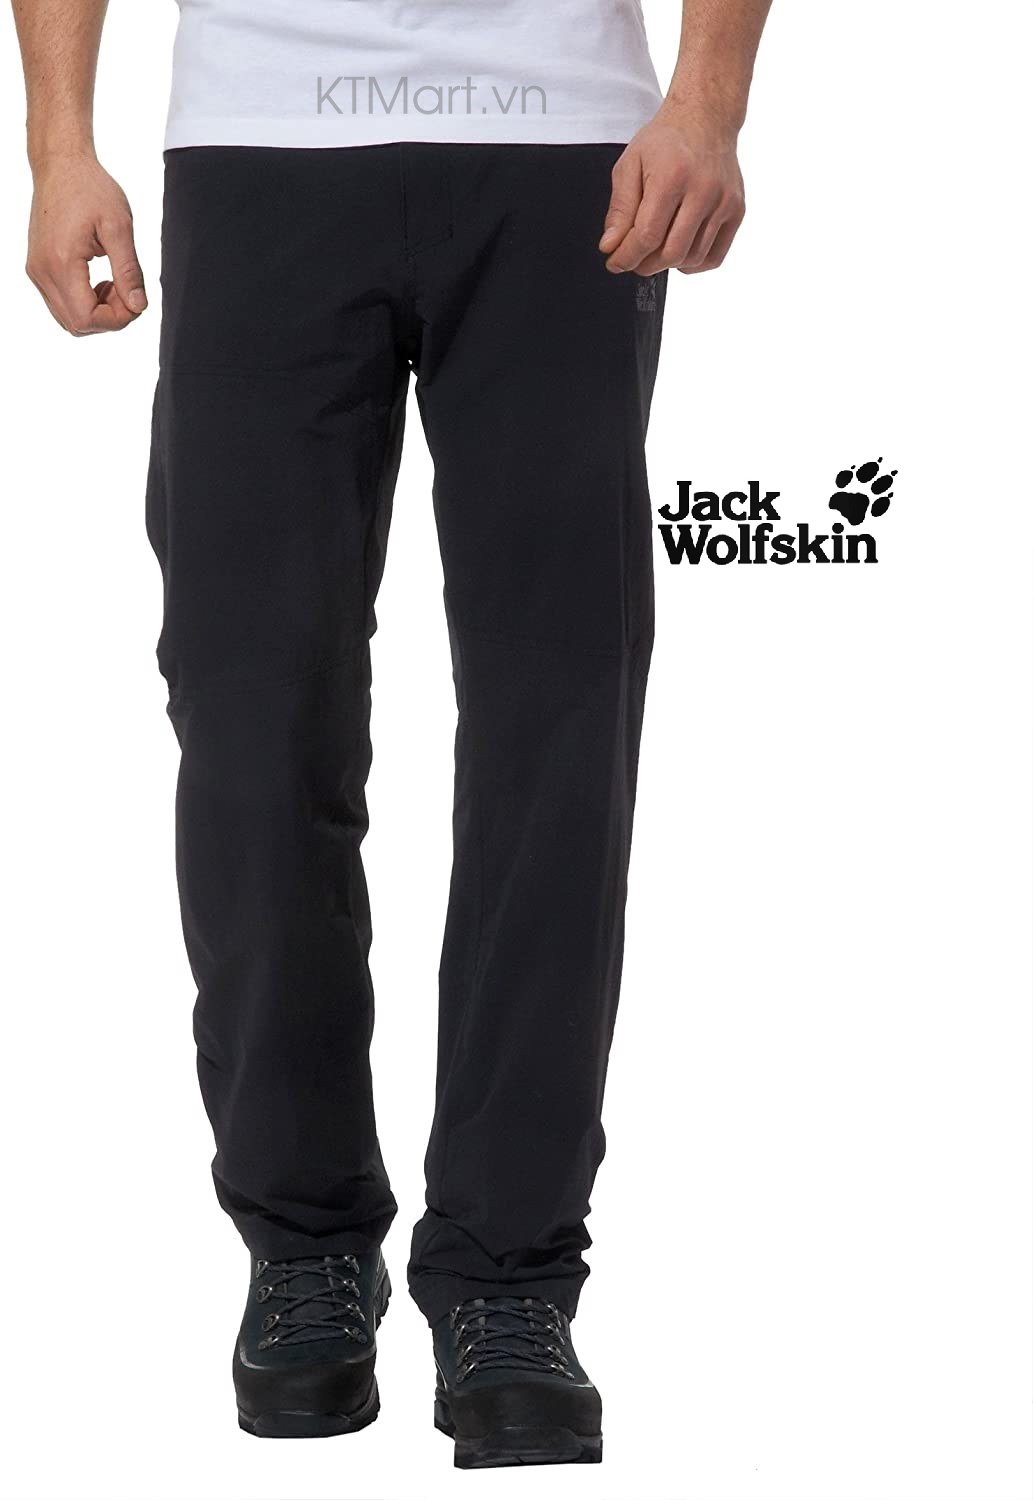 Quần chống thấm Jack Wolfskin Stretch Winter Pants 1101941 size 33/32